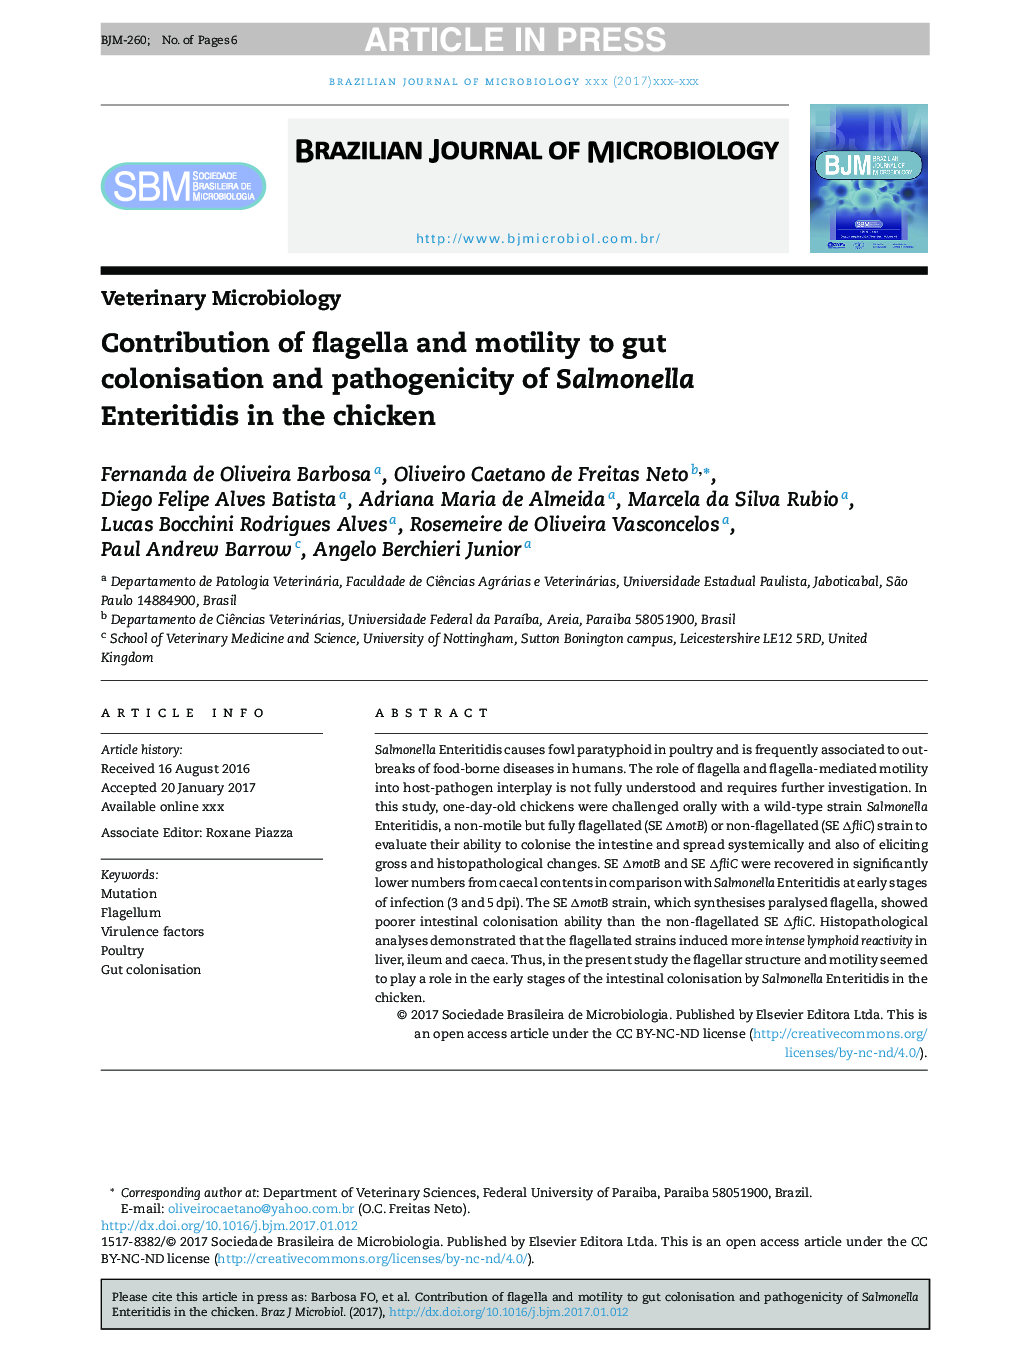 Contribution of flagella and motility to gut colonisation and pathogenicity of Salmonella Enteritidis in the chicken